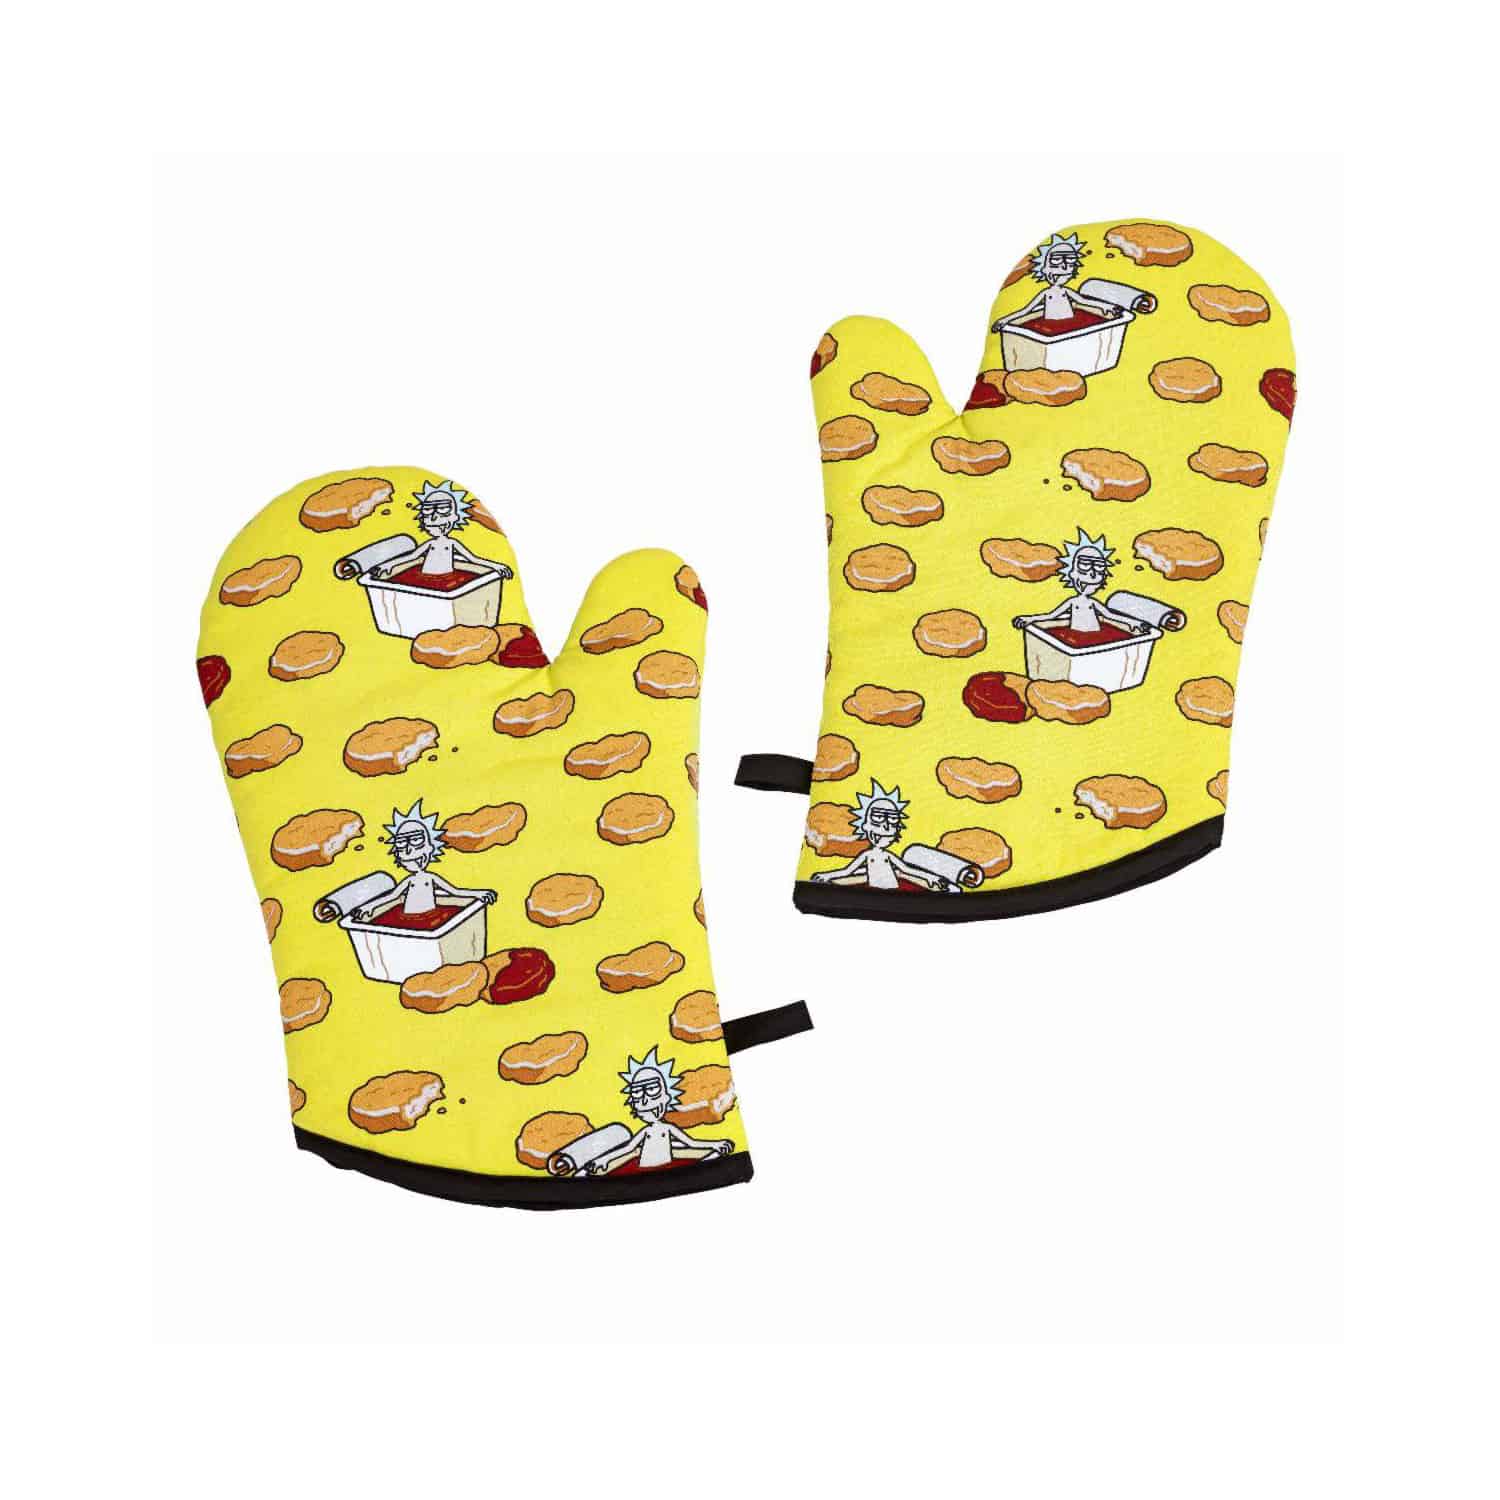 rick-and-morty-szechuan-sauce-oven-gloves